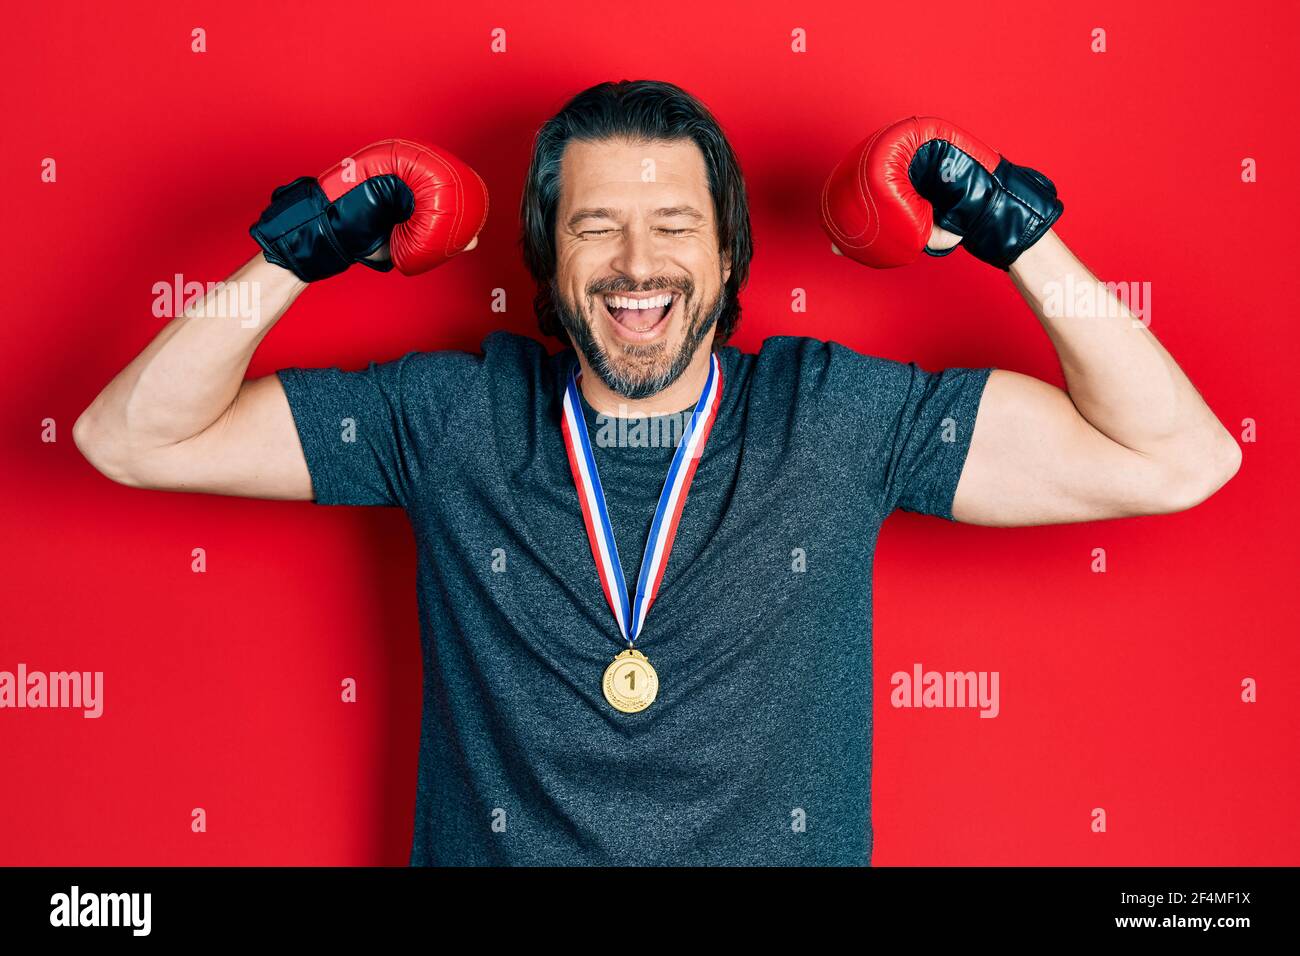 Middle age caucasian man wearing first place medal on boxing competition  smiling and laughing hard out loud because funny crazy joke Stock Photo -  Alamy